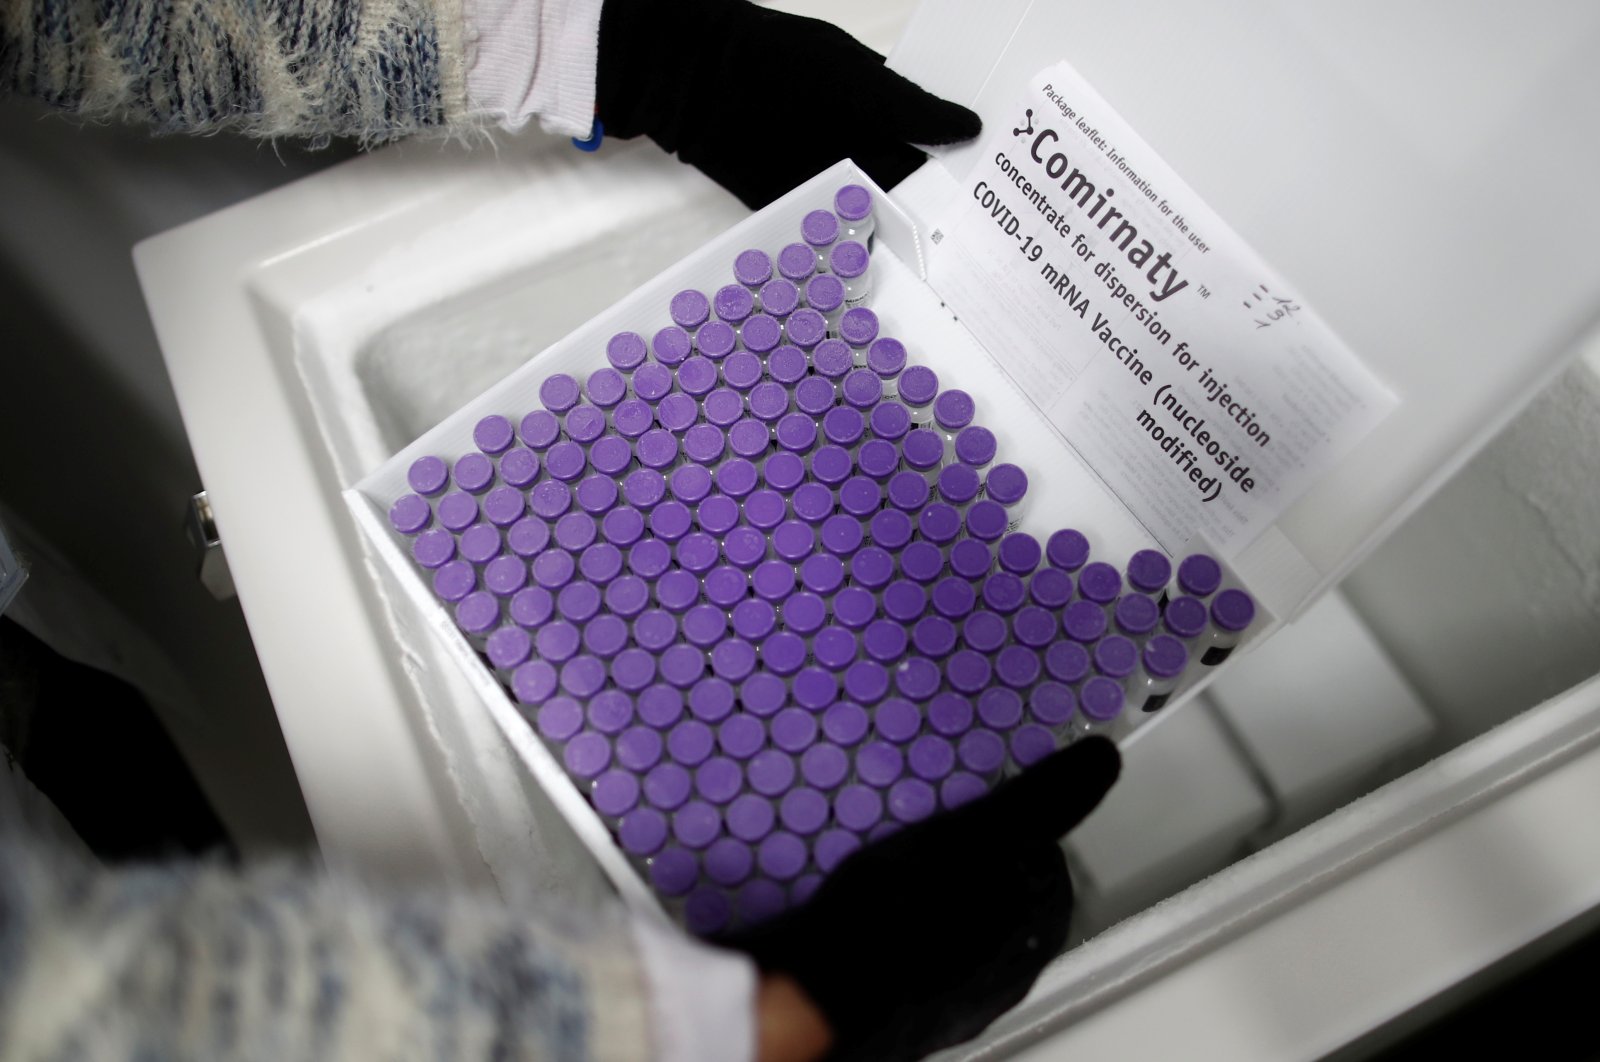 A health worker removes a box containing vials of the "Comirnaty" Pfizer-BioNTech COVID-19 vaccine at an ultra low temperature at the South Ile-de-France Hospital Group in Melun, near Paris, France, March 26, 2021. (Reuters Photo)